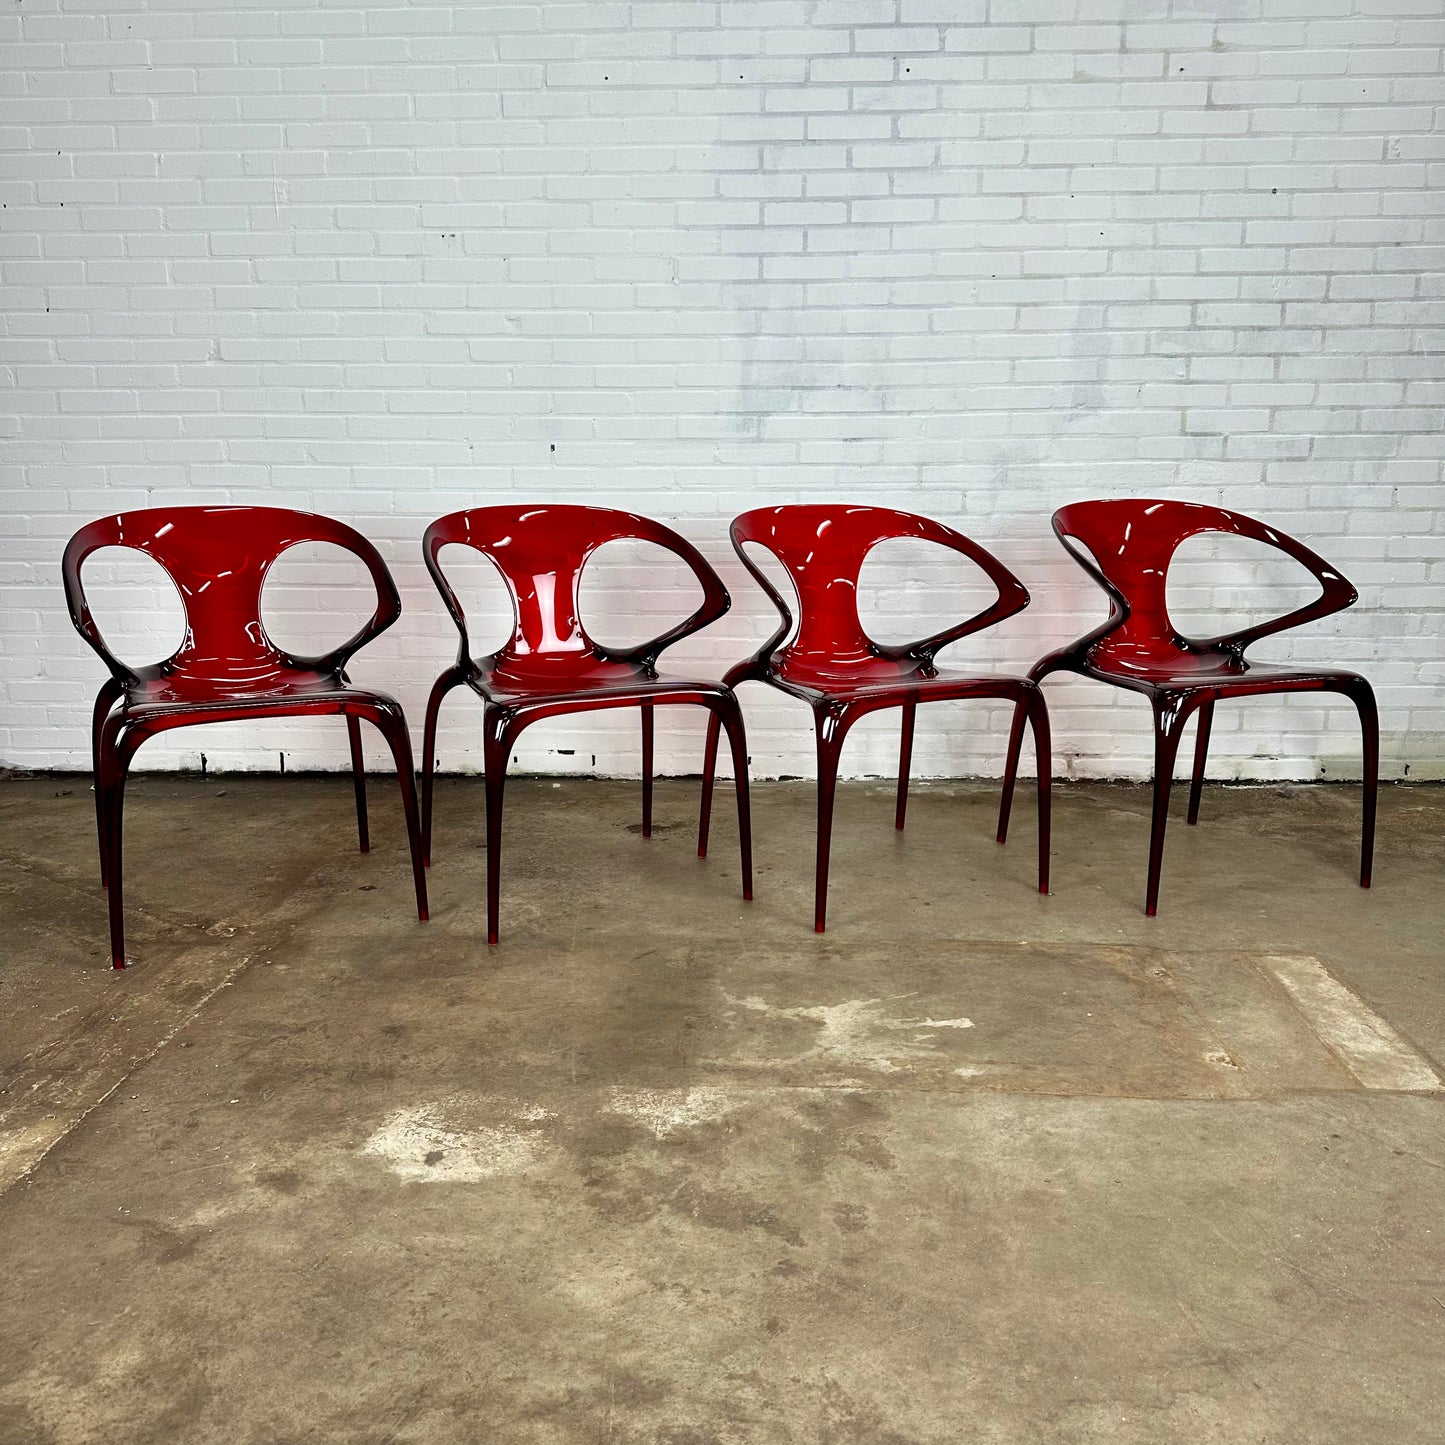 set of 4 - Ava Bridge Dining Chairs by Song Wen Zhong for Roche Bobois